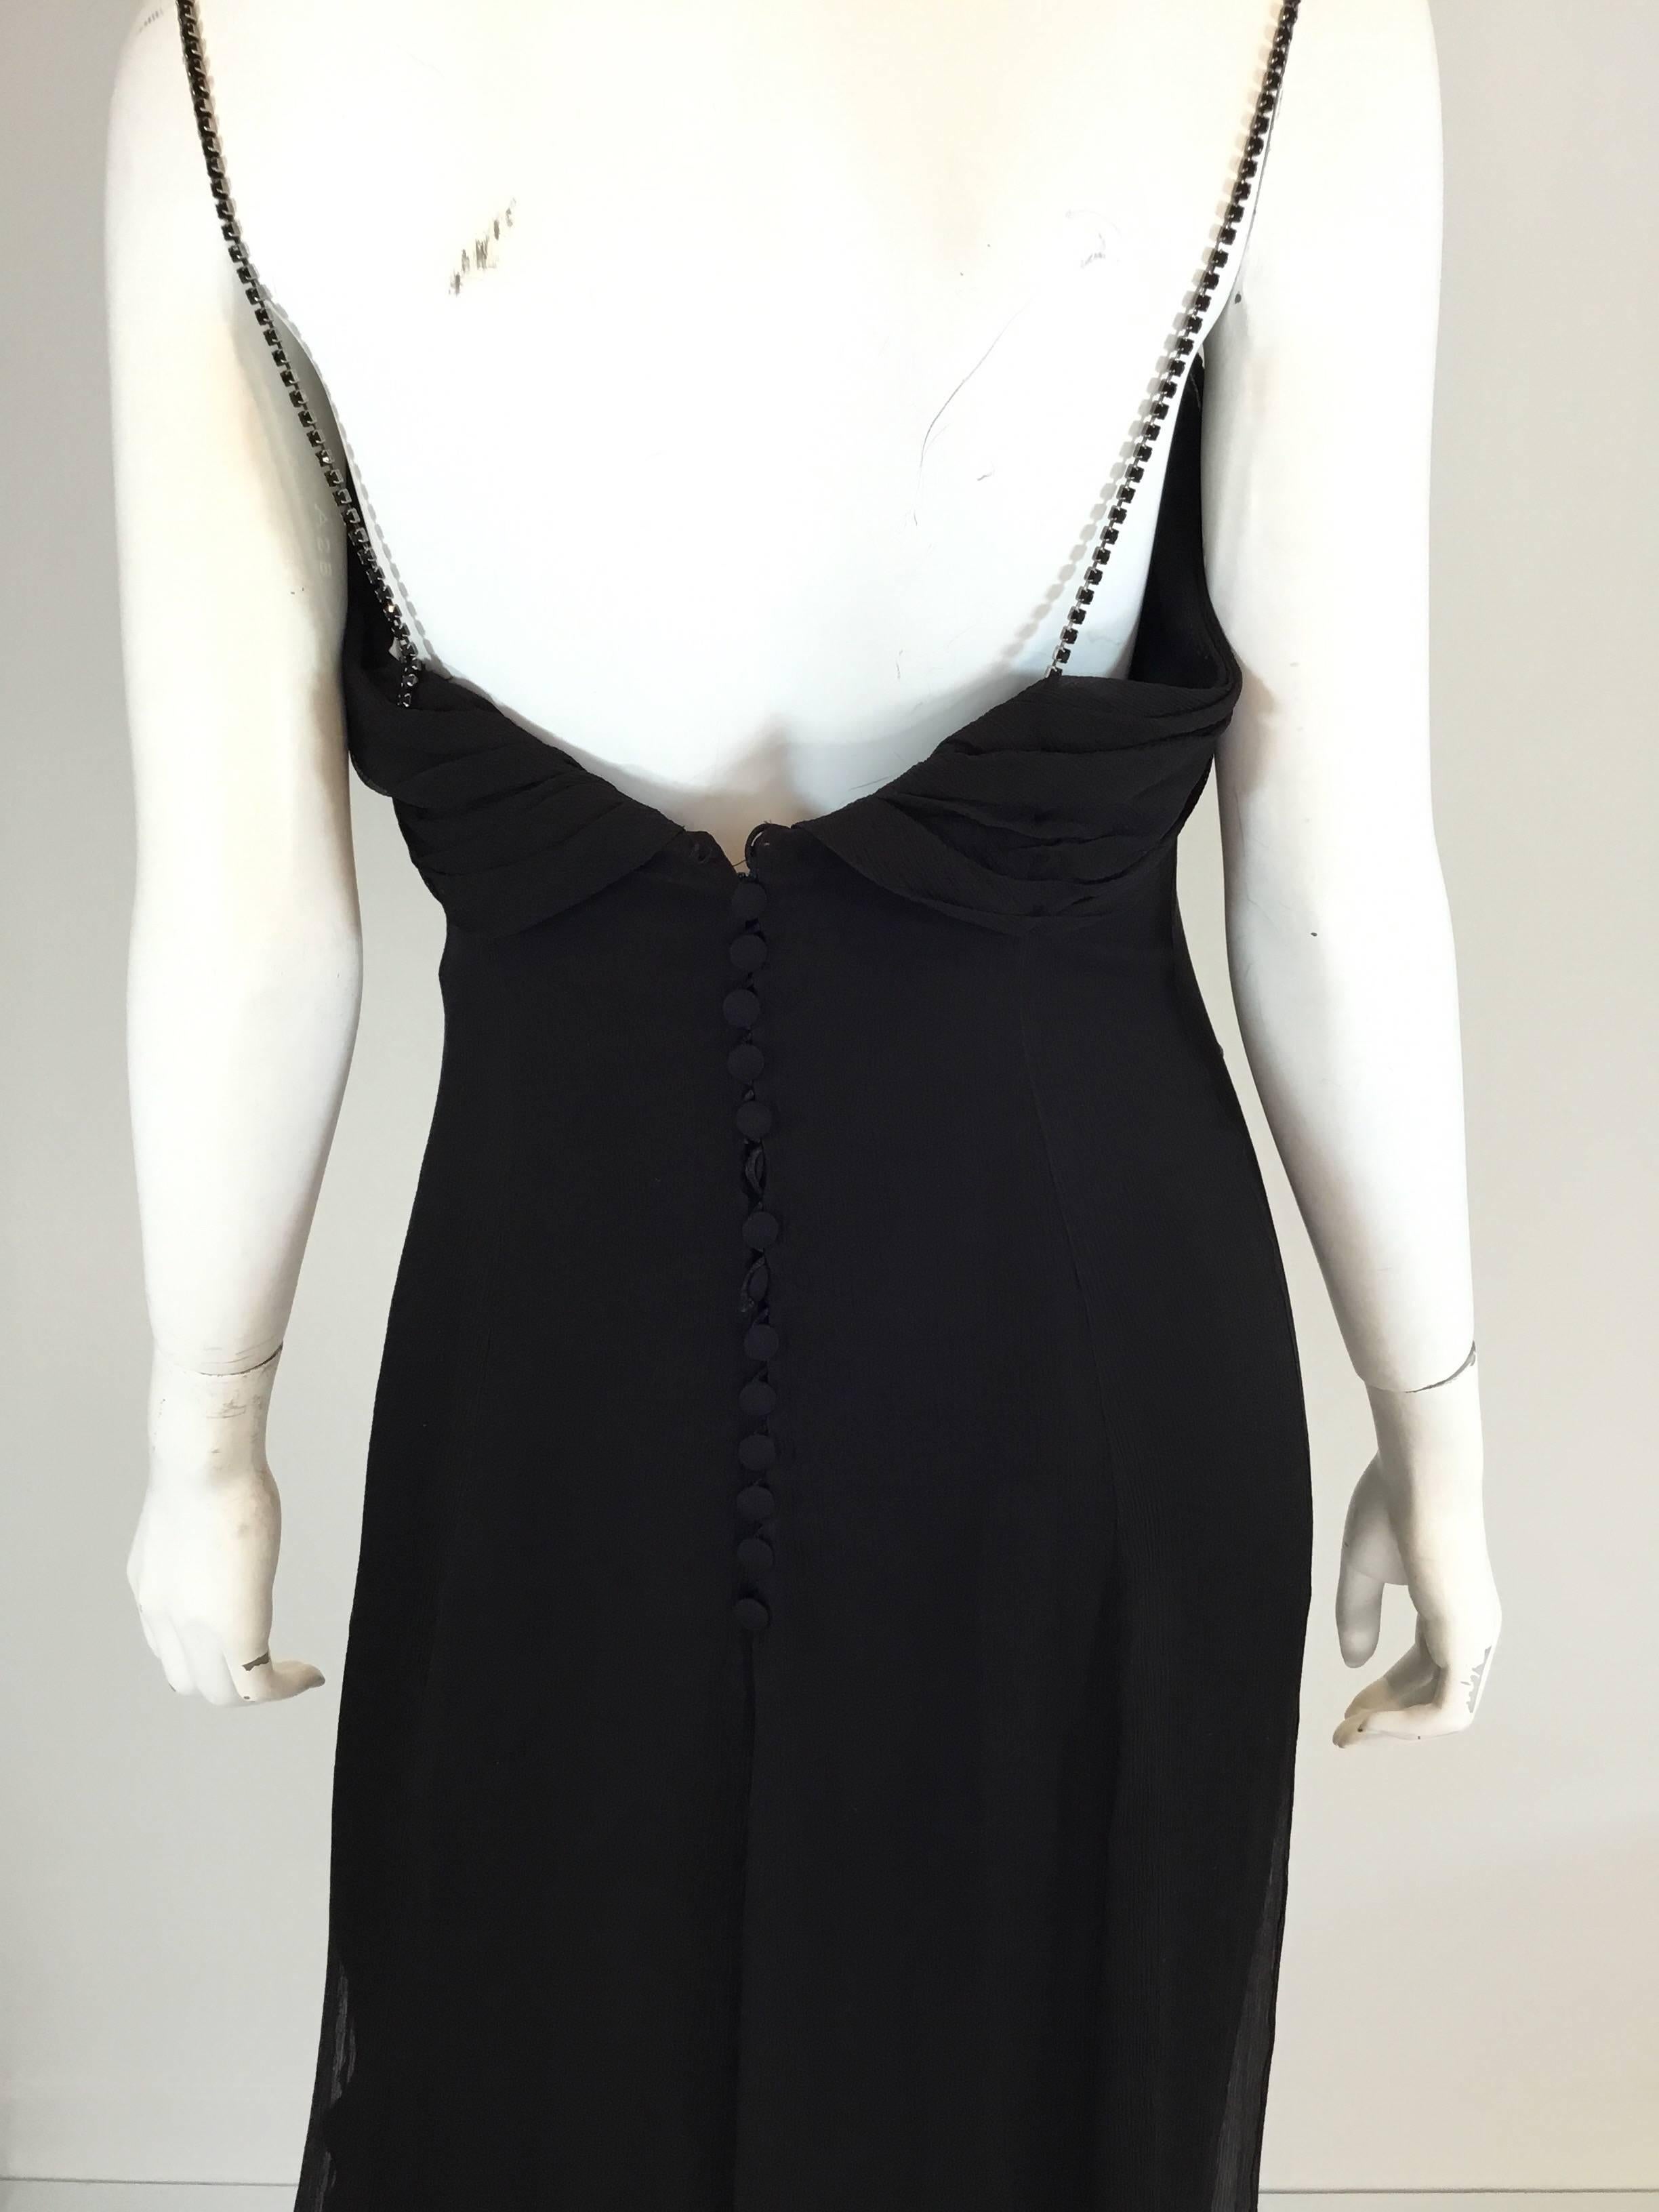 Lanvin Chiffon Blend Dress Vintage 1970’s with Rhinestone Straps In Excellent Condition For Sale In Carmel, CA